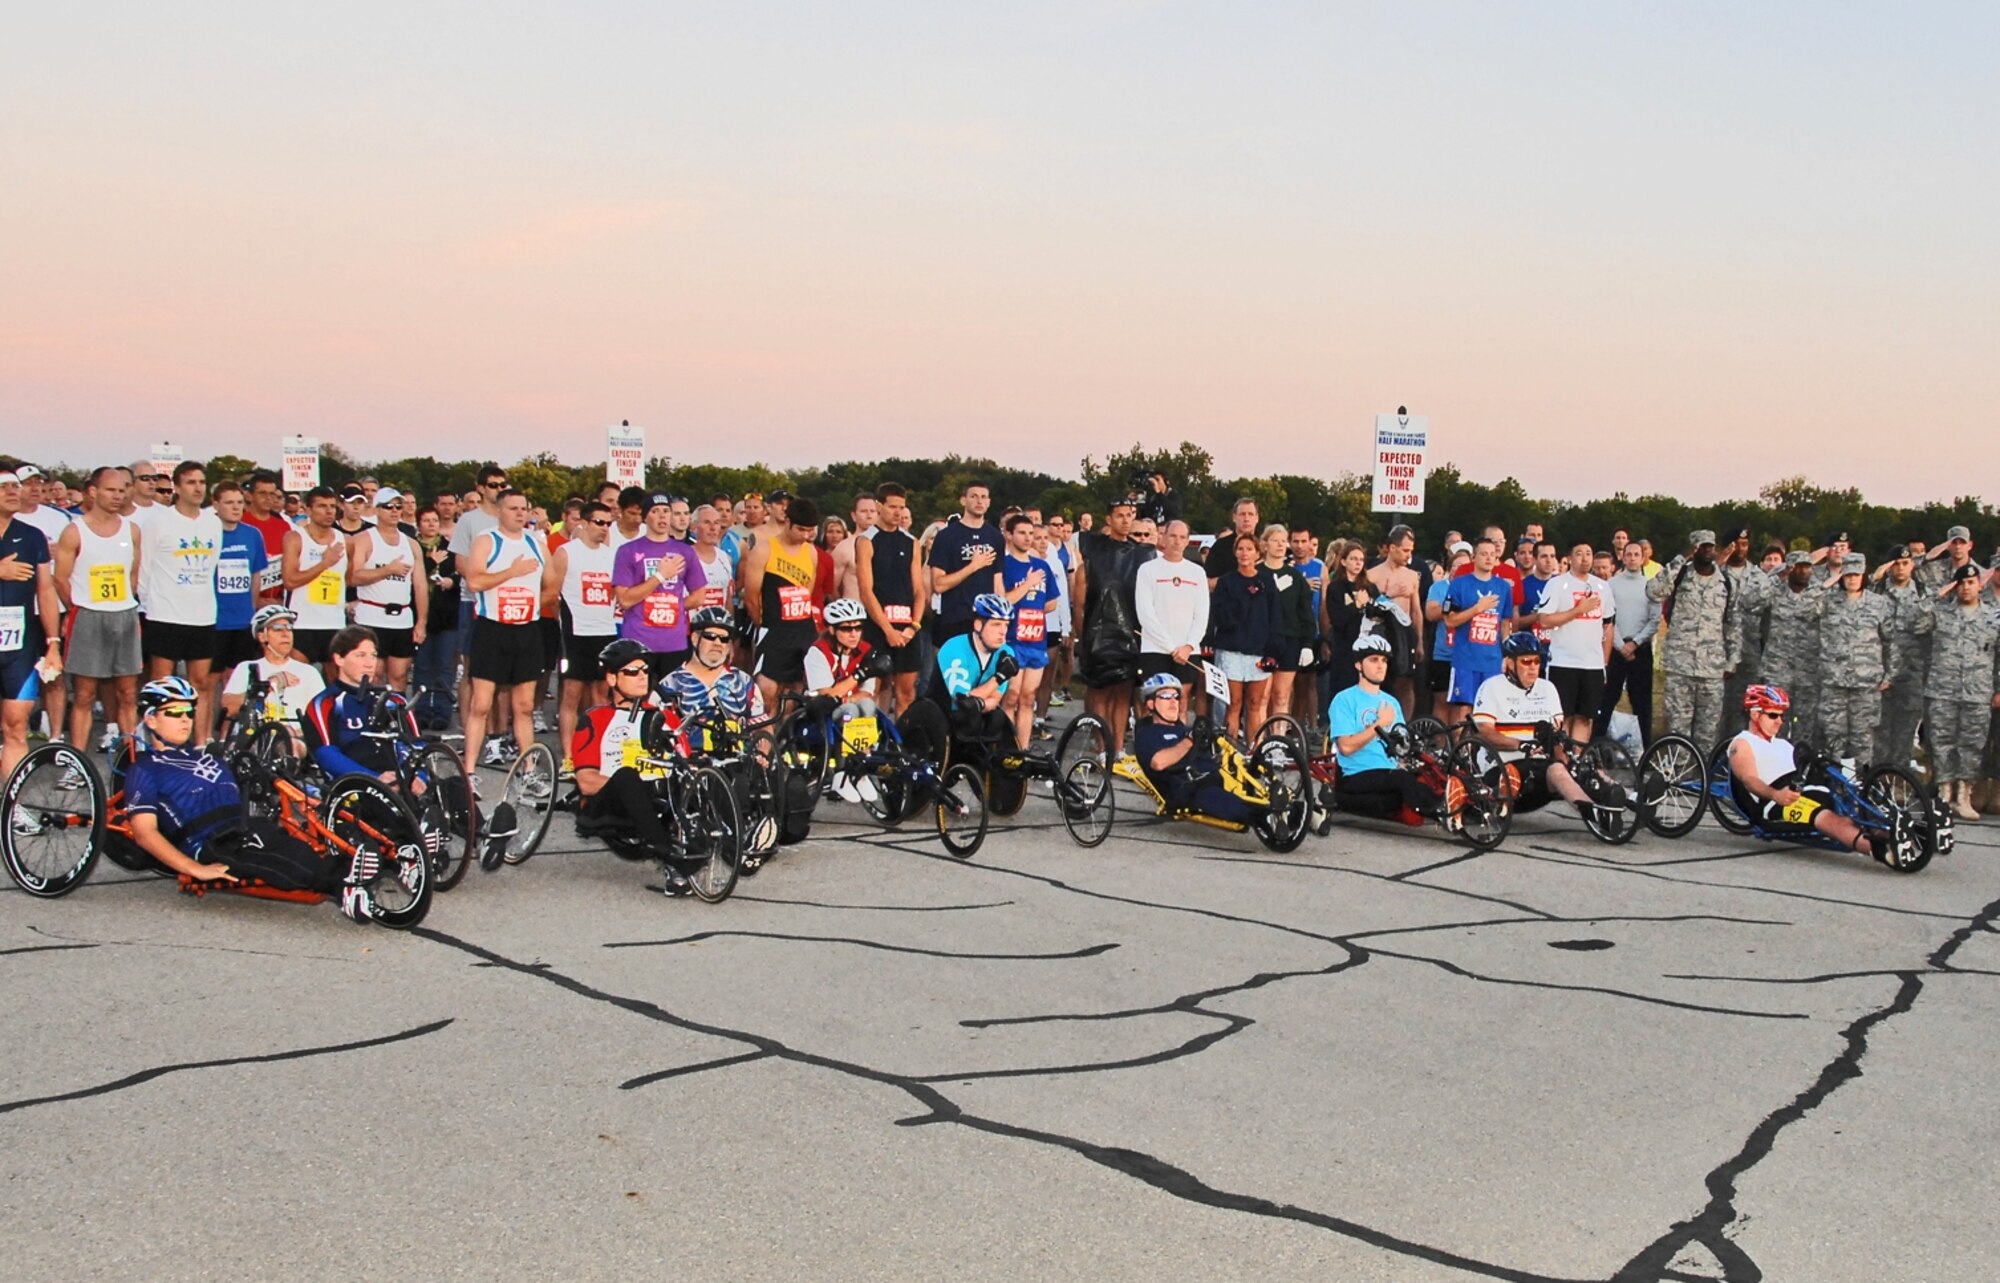 Runners and wheel racers participate in opening ceremonies for the 2009 United States Air Force Marathon at Wright-Patterson Air Force Base, Ohio in this file photo.  The 14th annual USAF Marathon is Sept. 18, 2010.  Registration for the 2010 marathon opens Jan. 1.  (U.S. Air Force photo/Ben Strasser) 